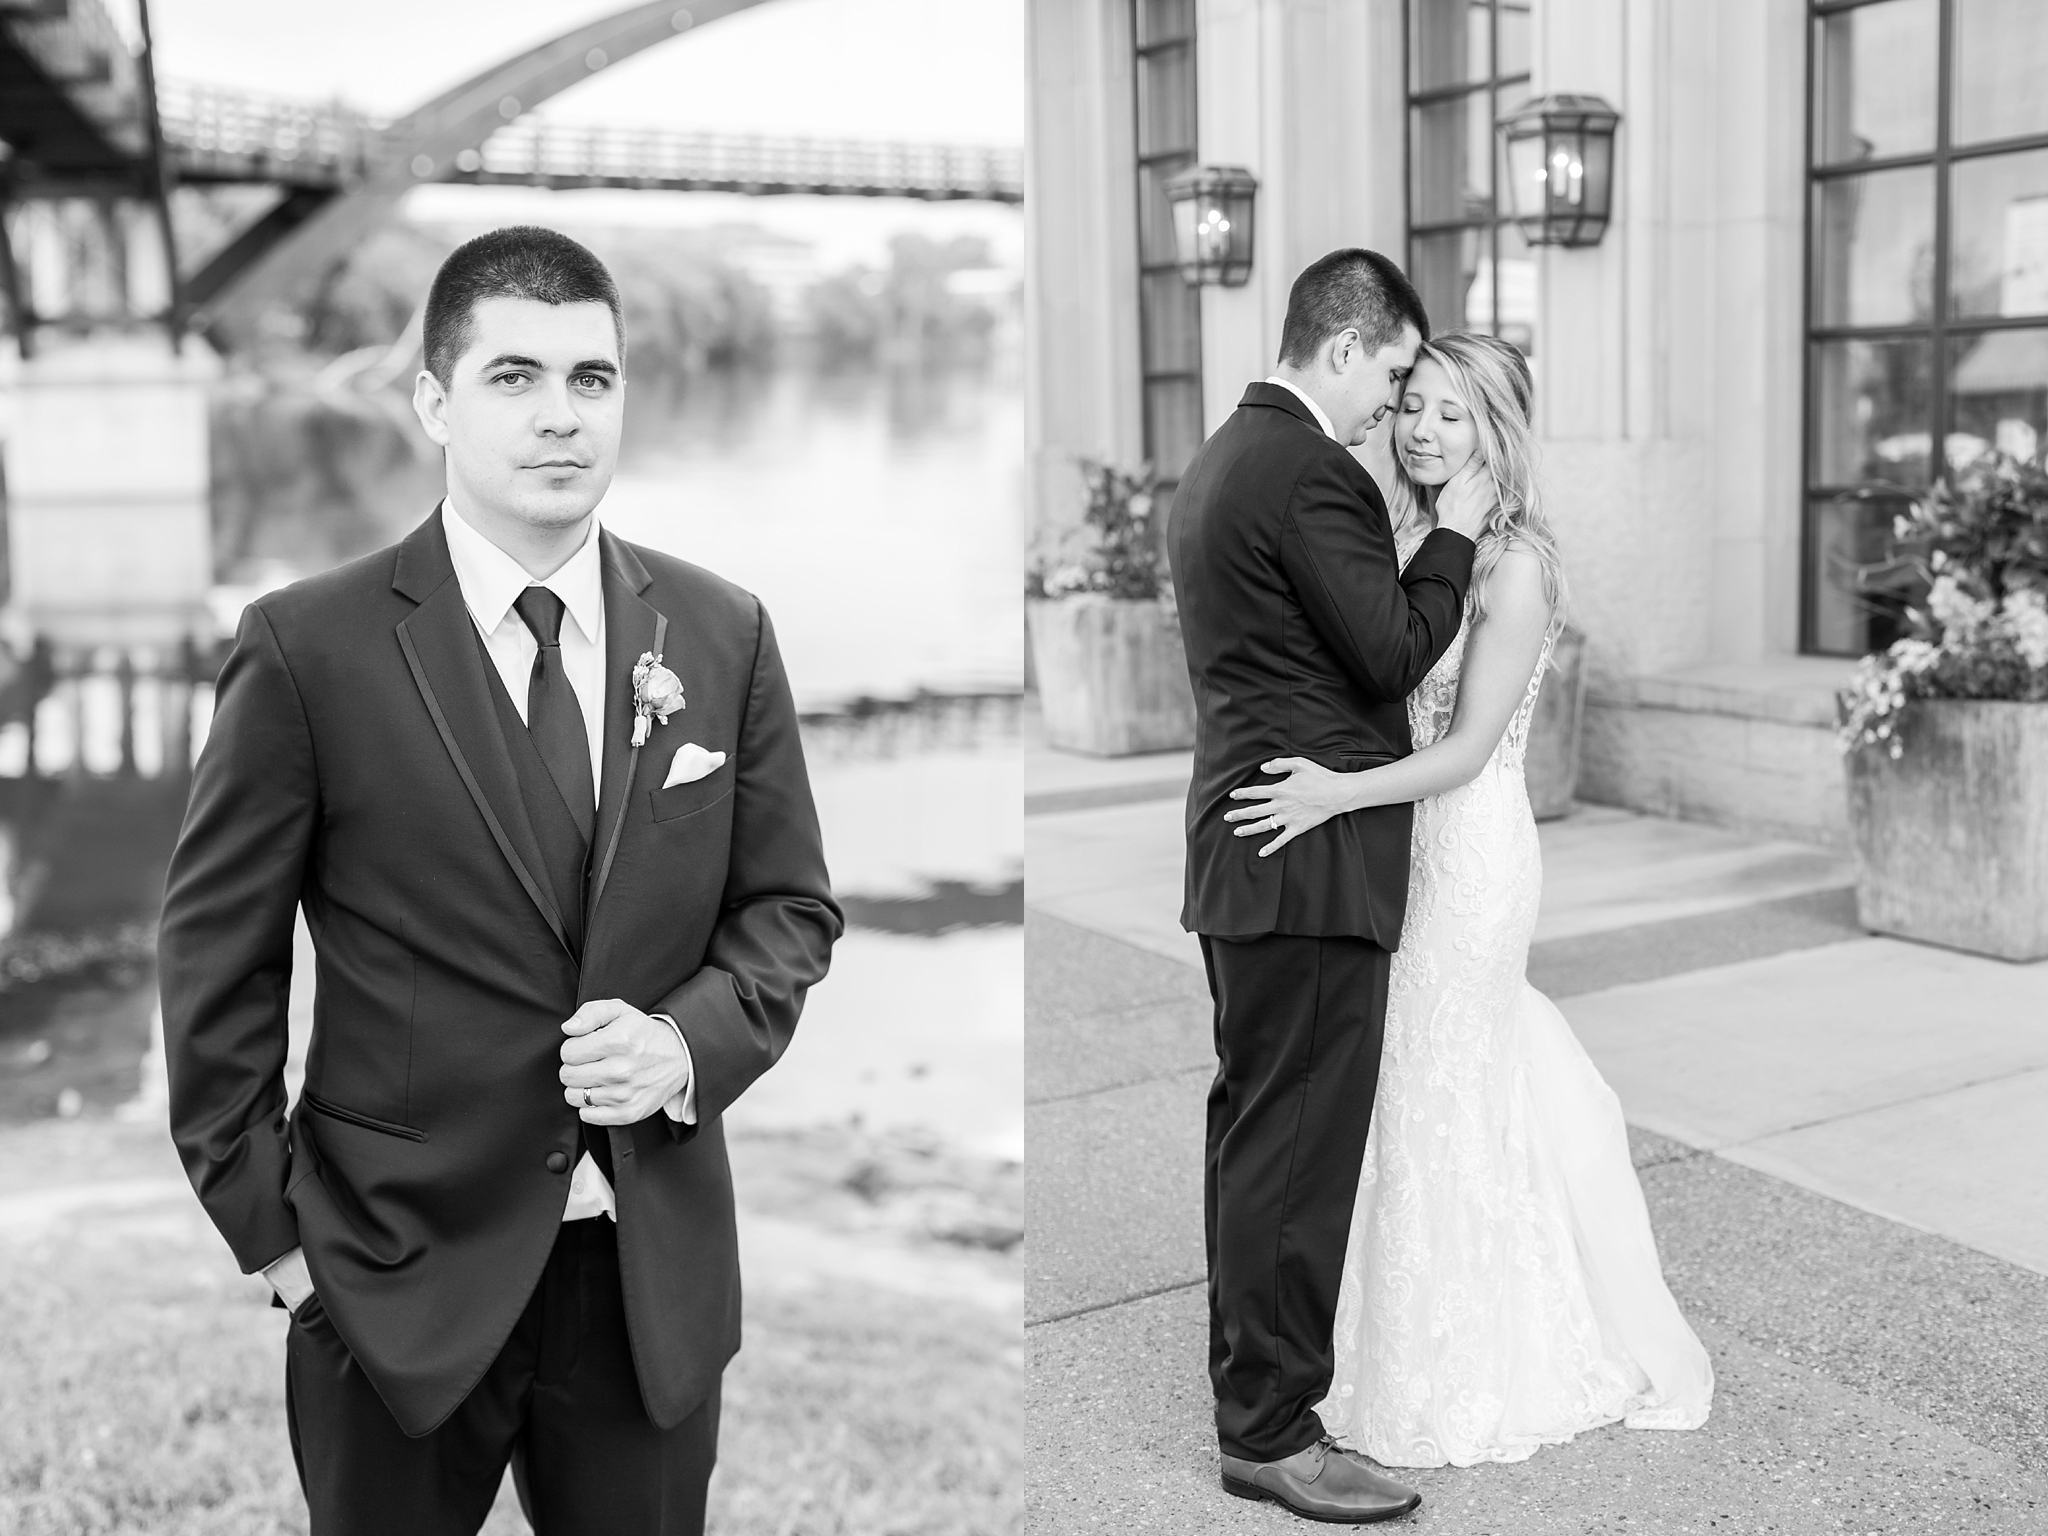 candid-romantic-wedding-photos-at-the-h-hotel-in-midland-michigan-by-courtney-carolyn-photography_0112.jpg